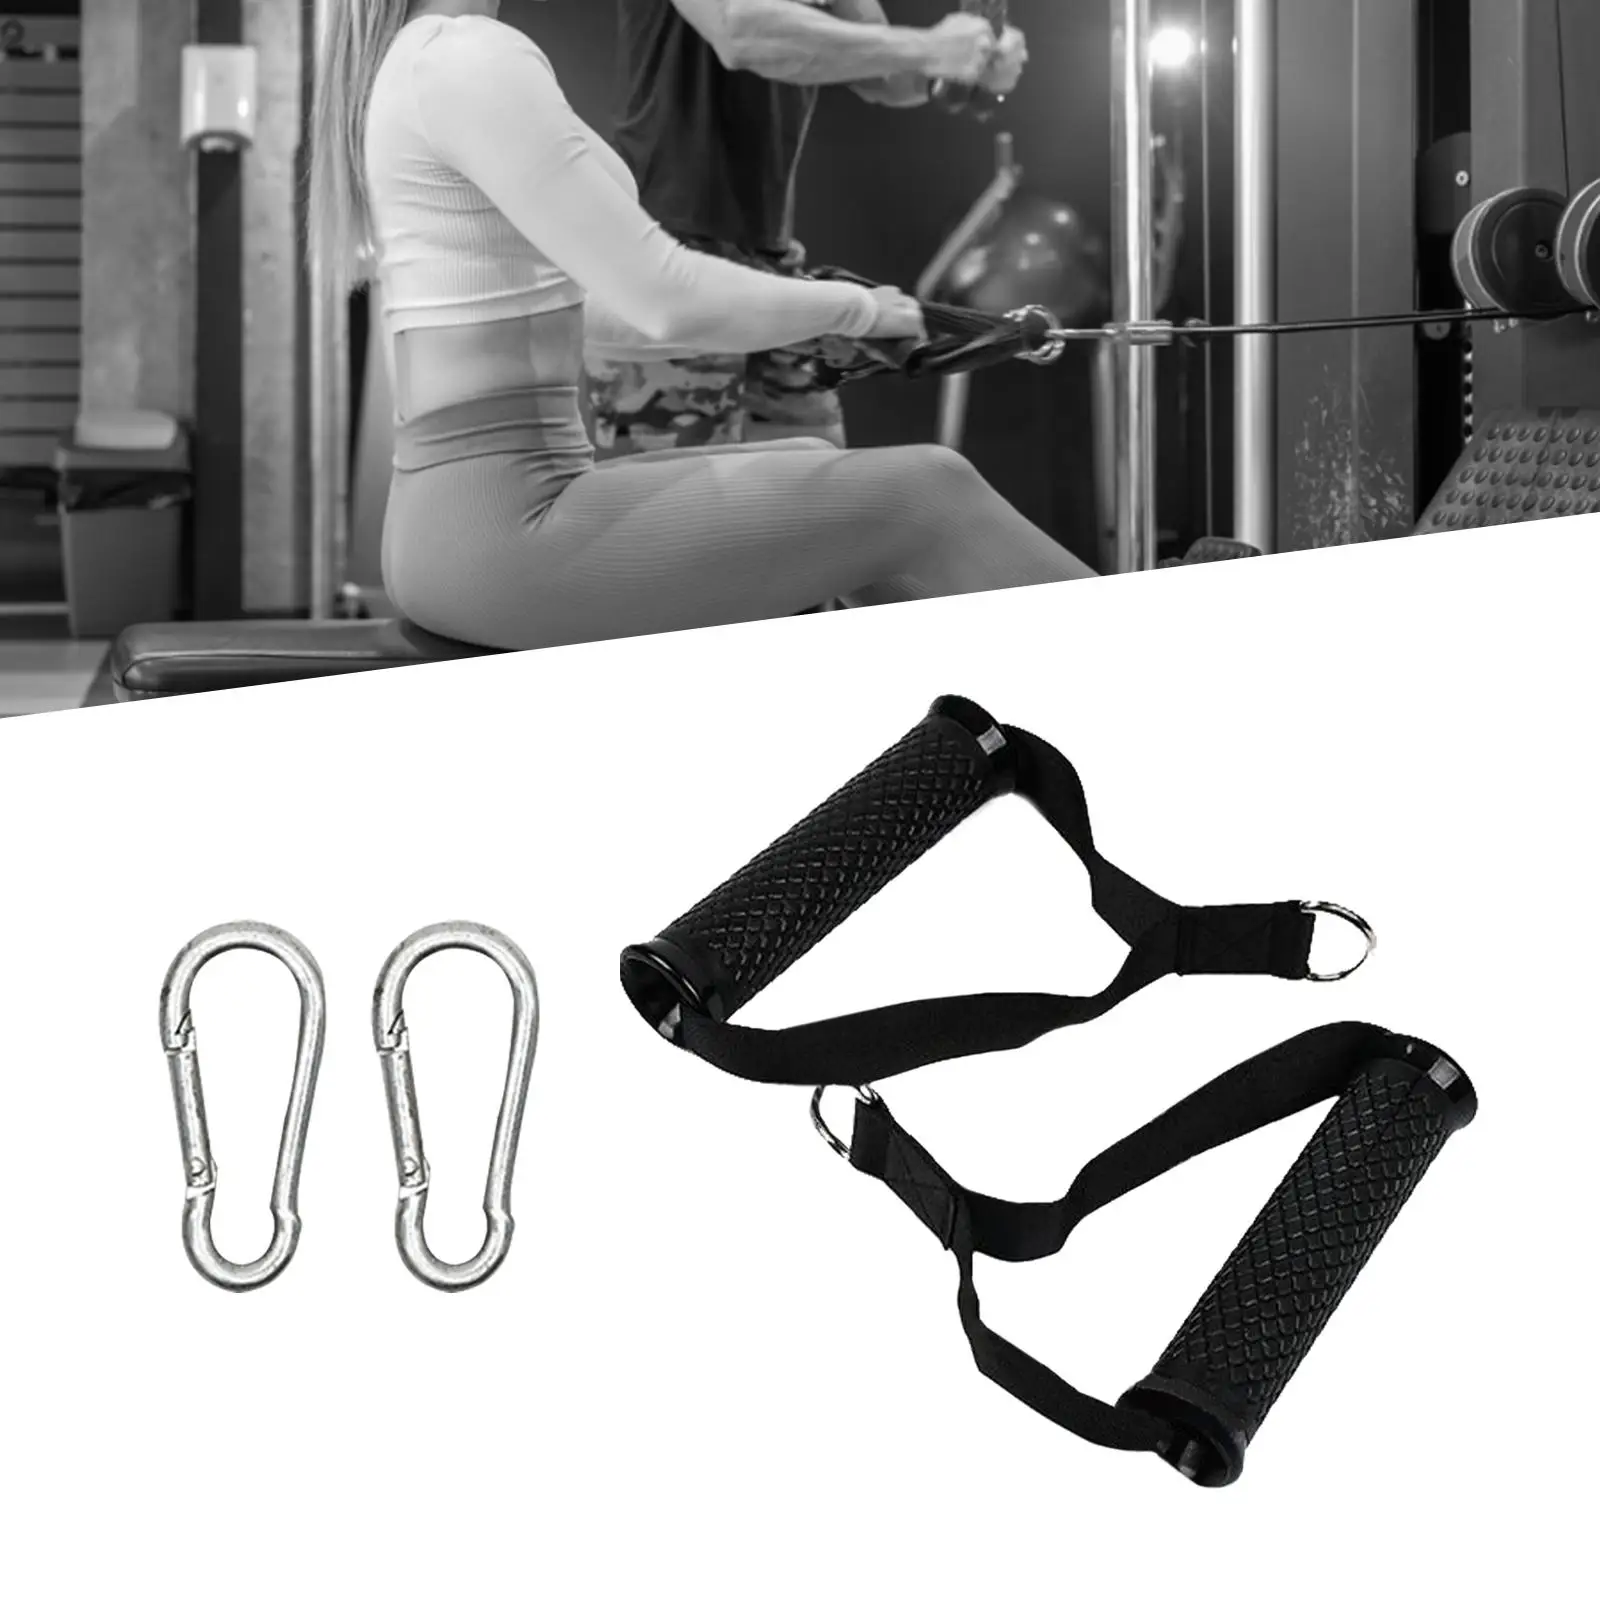 2 Pieces Universal Cable Machine Attachment Handles Nylon Equipment LAT Row Bar for workout Workout Strength Training Pilates